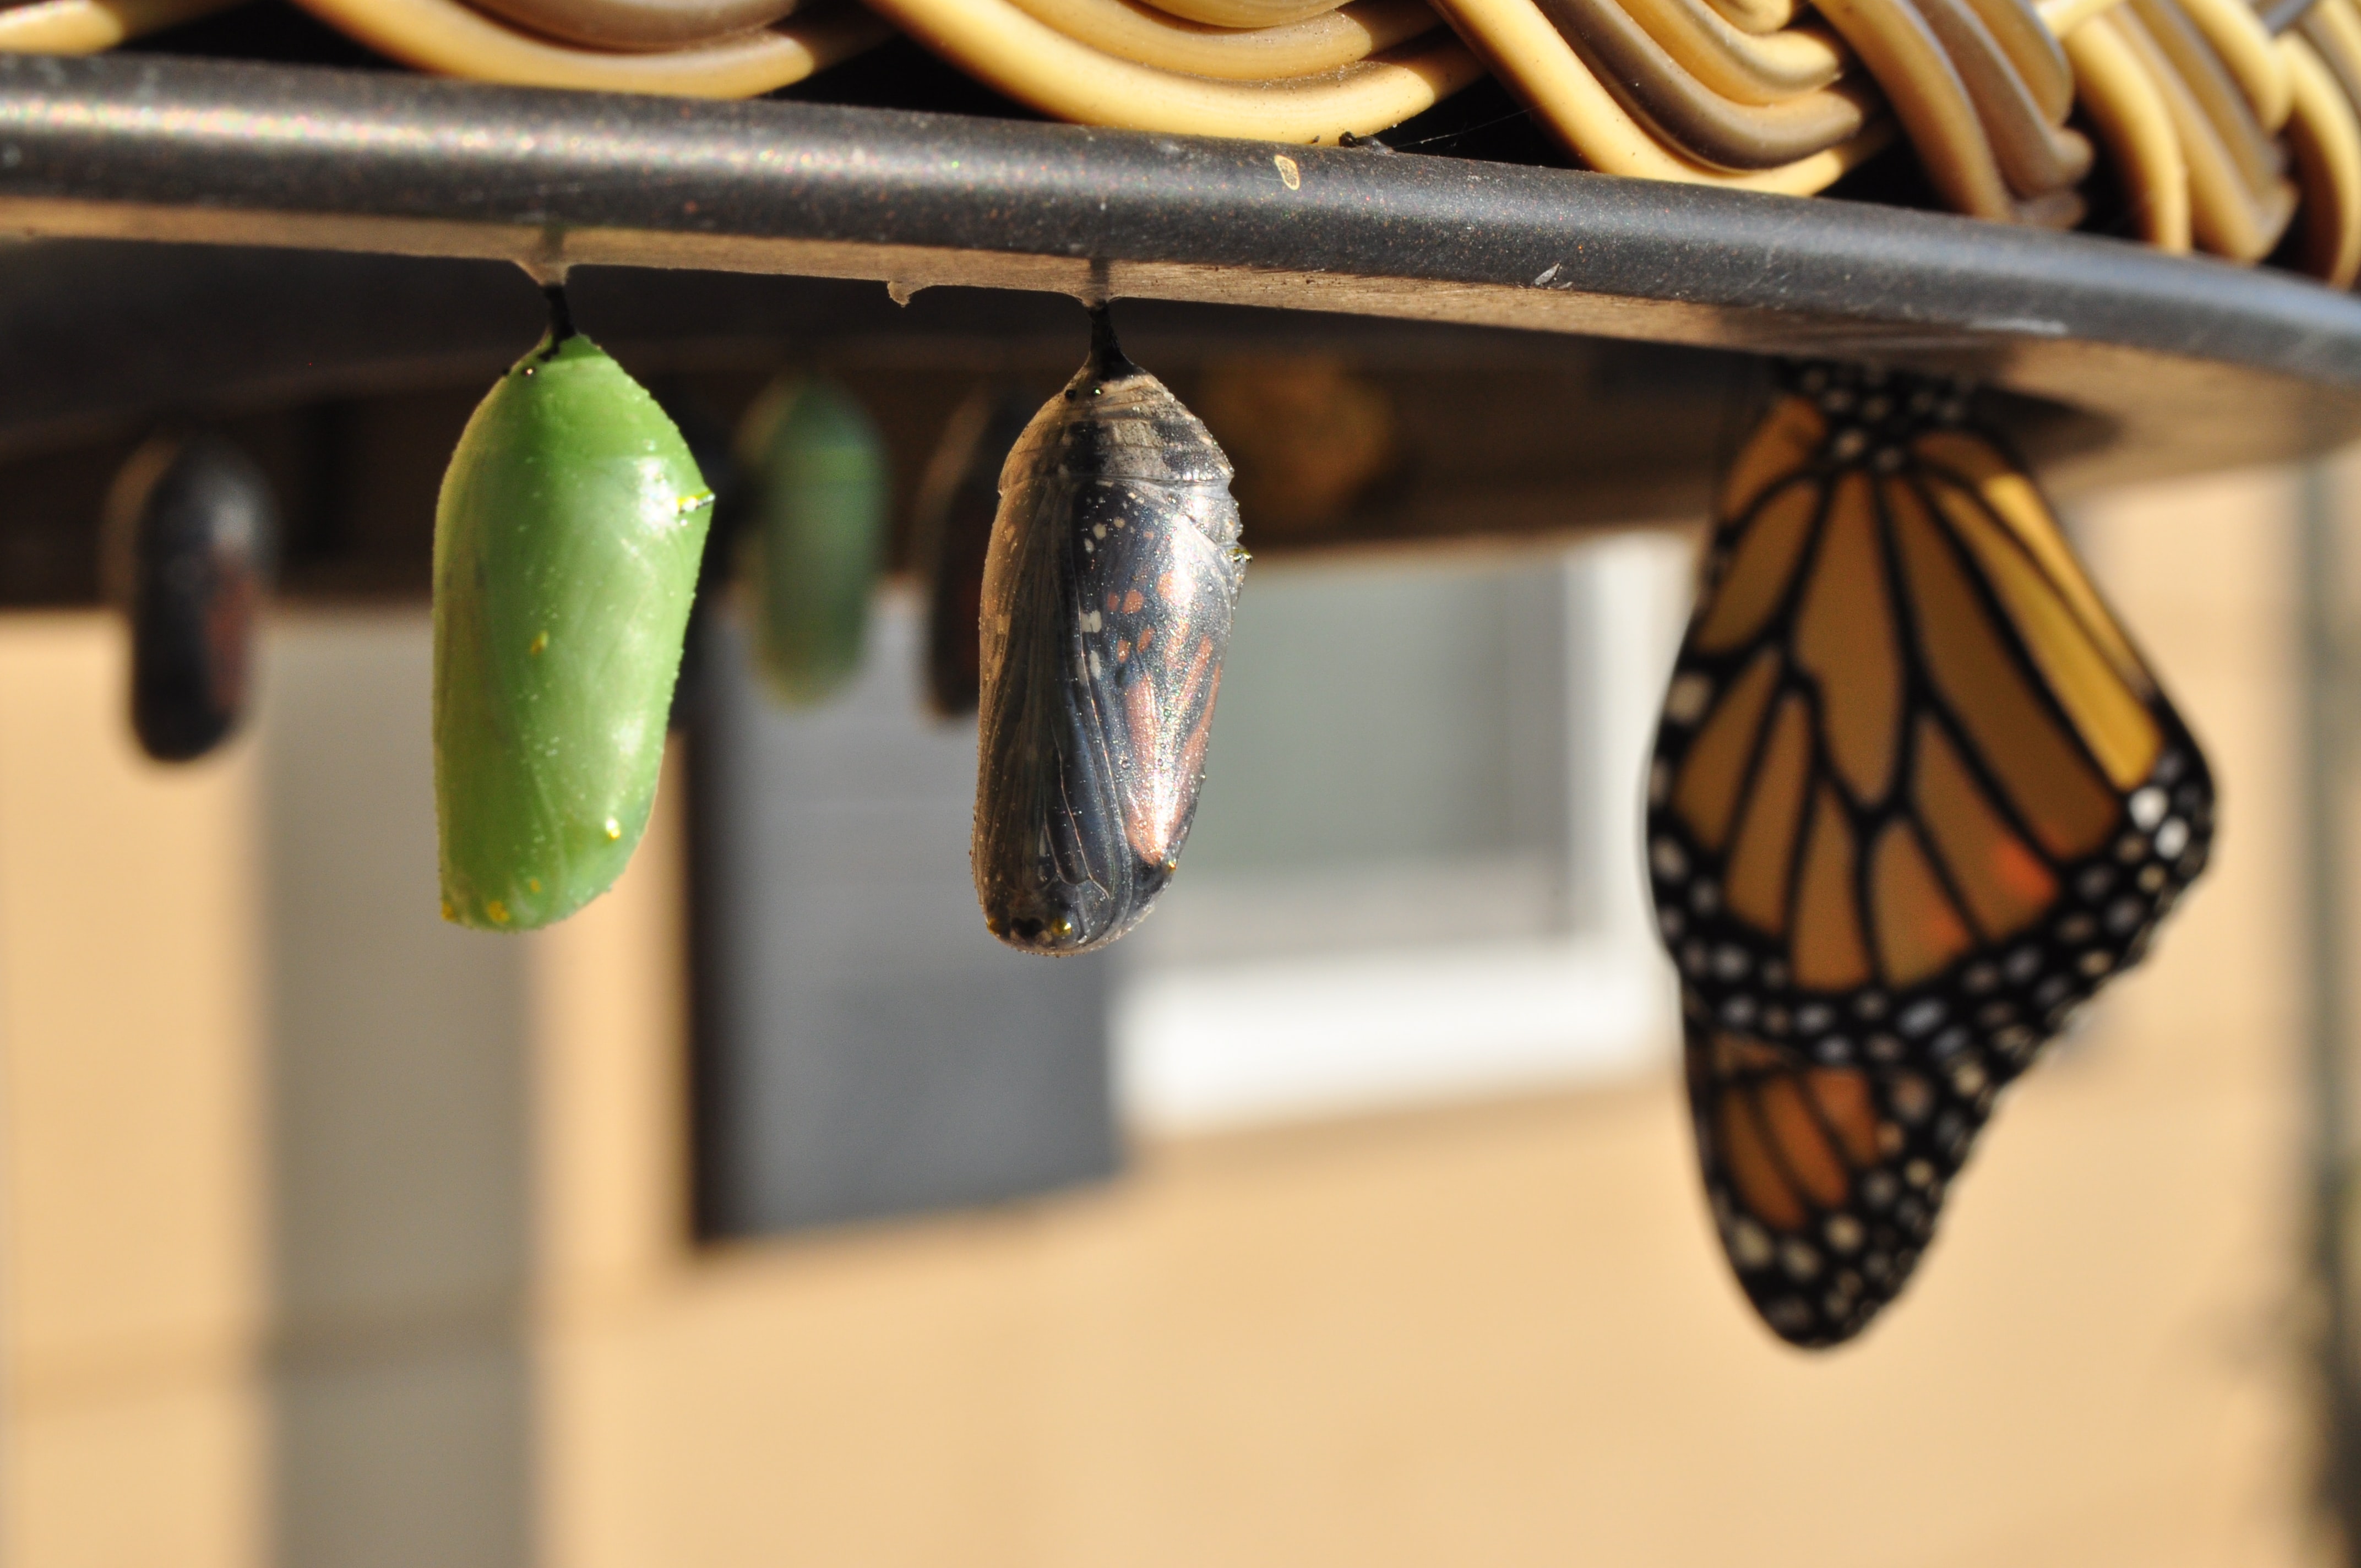 Adult butterfly and caterpillars in cocoons